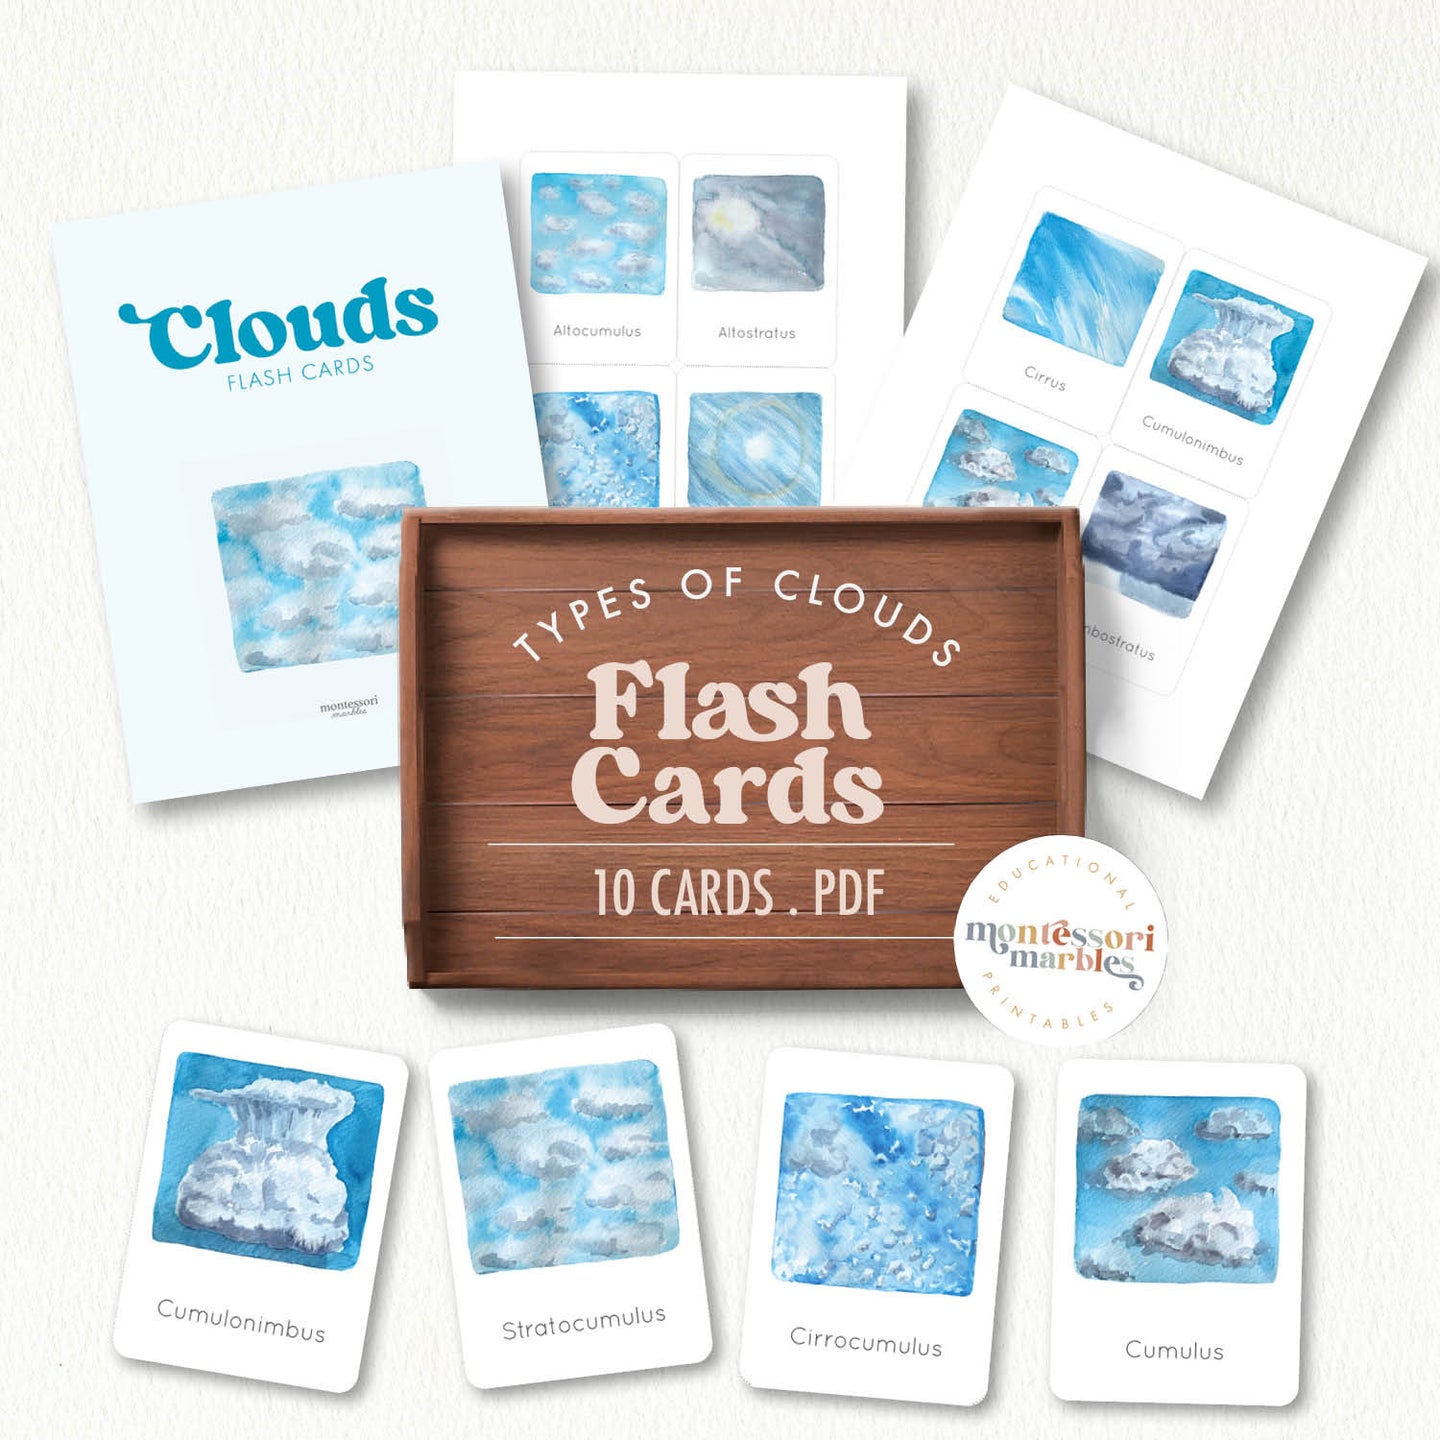 Clouds Flash Cards